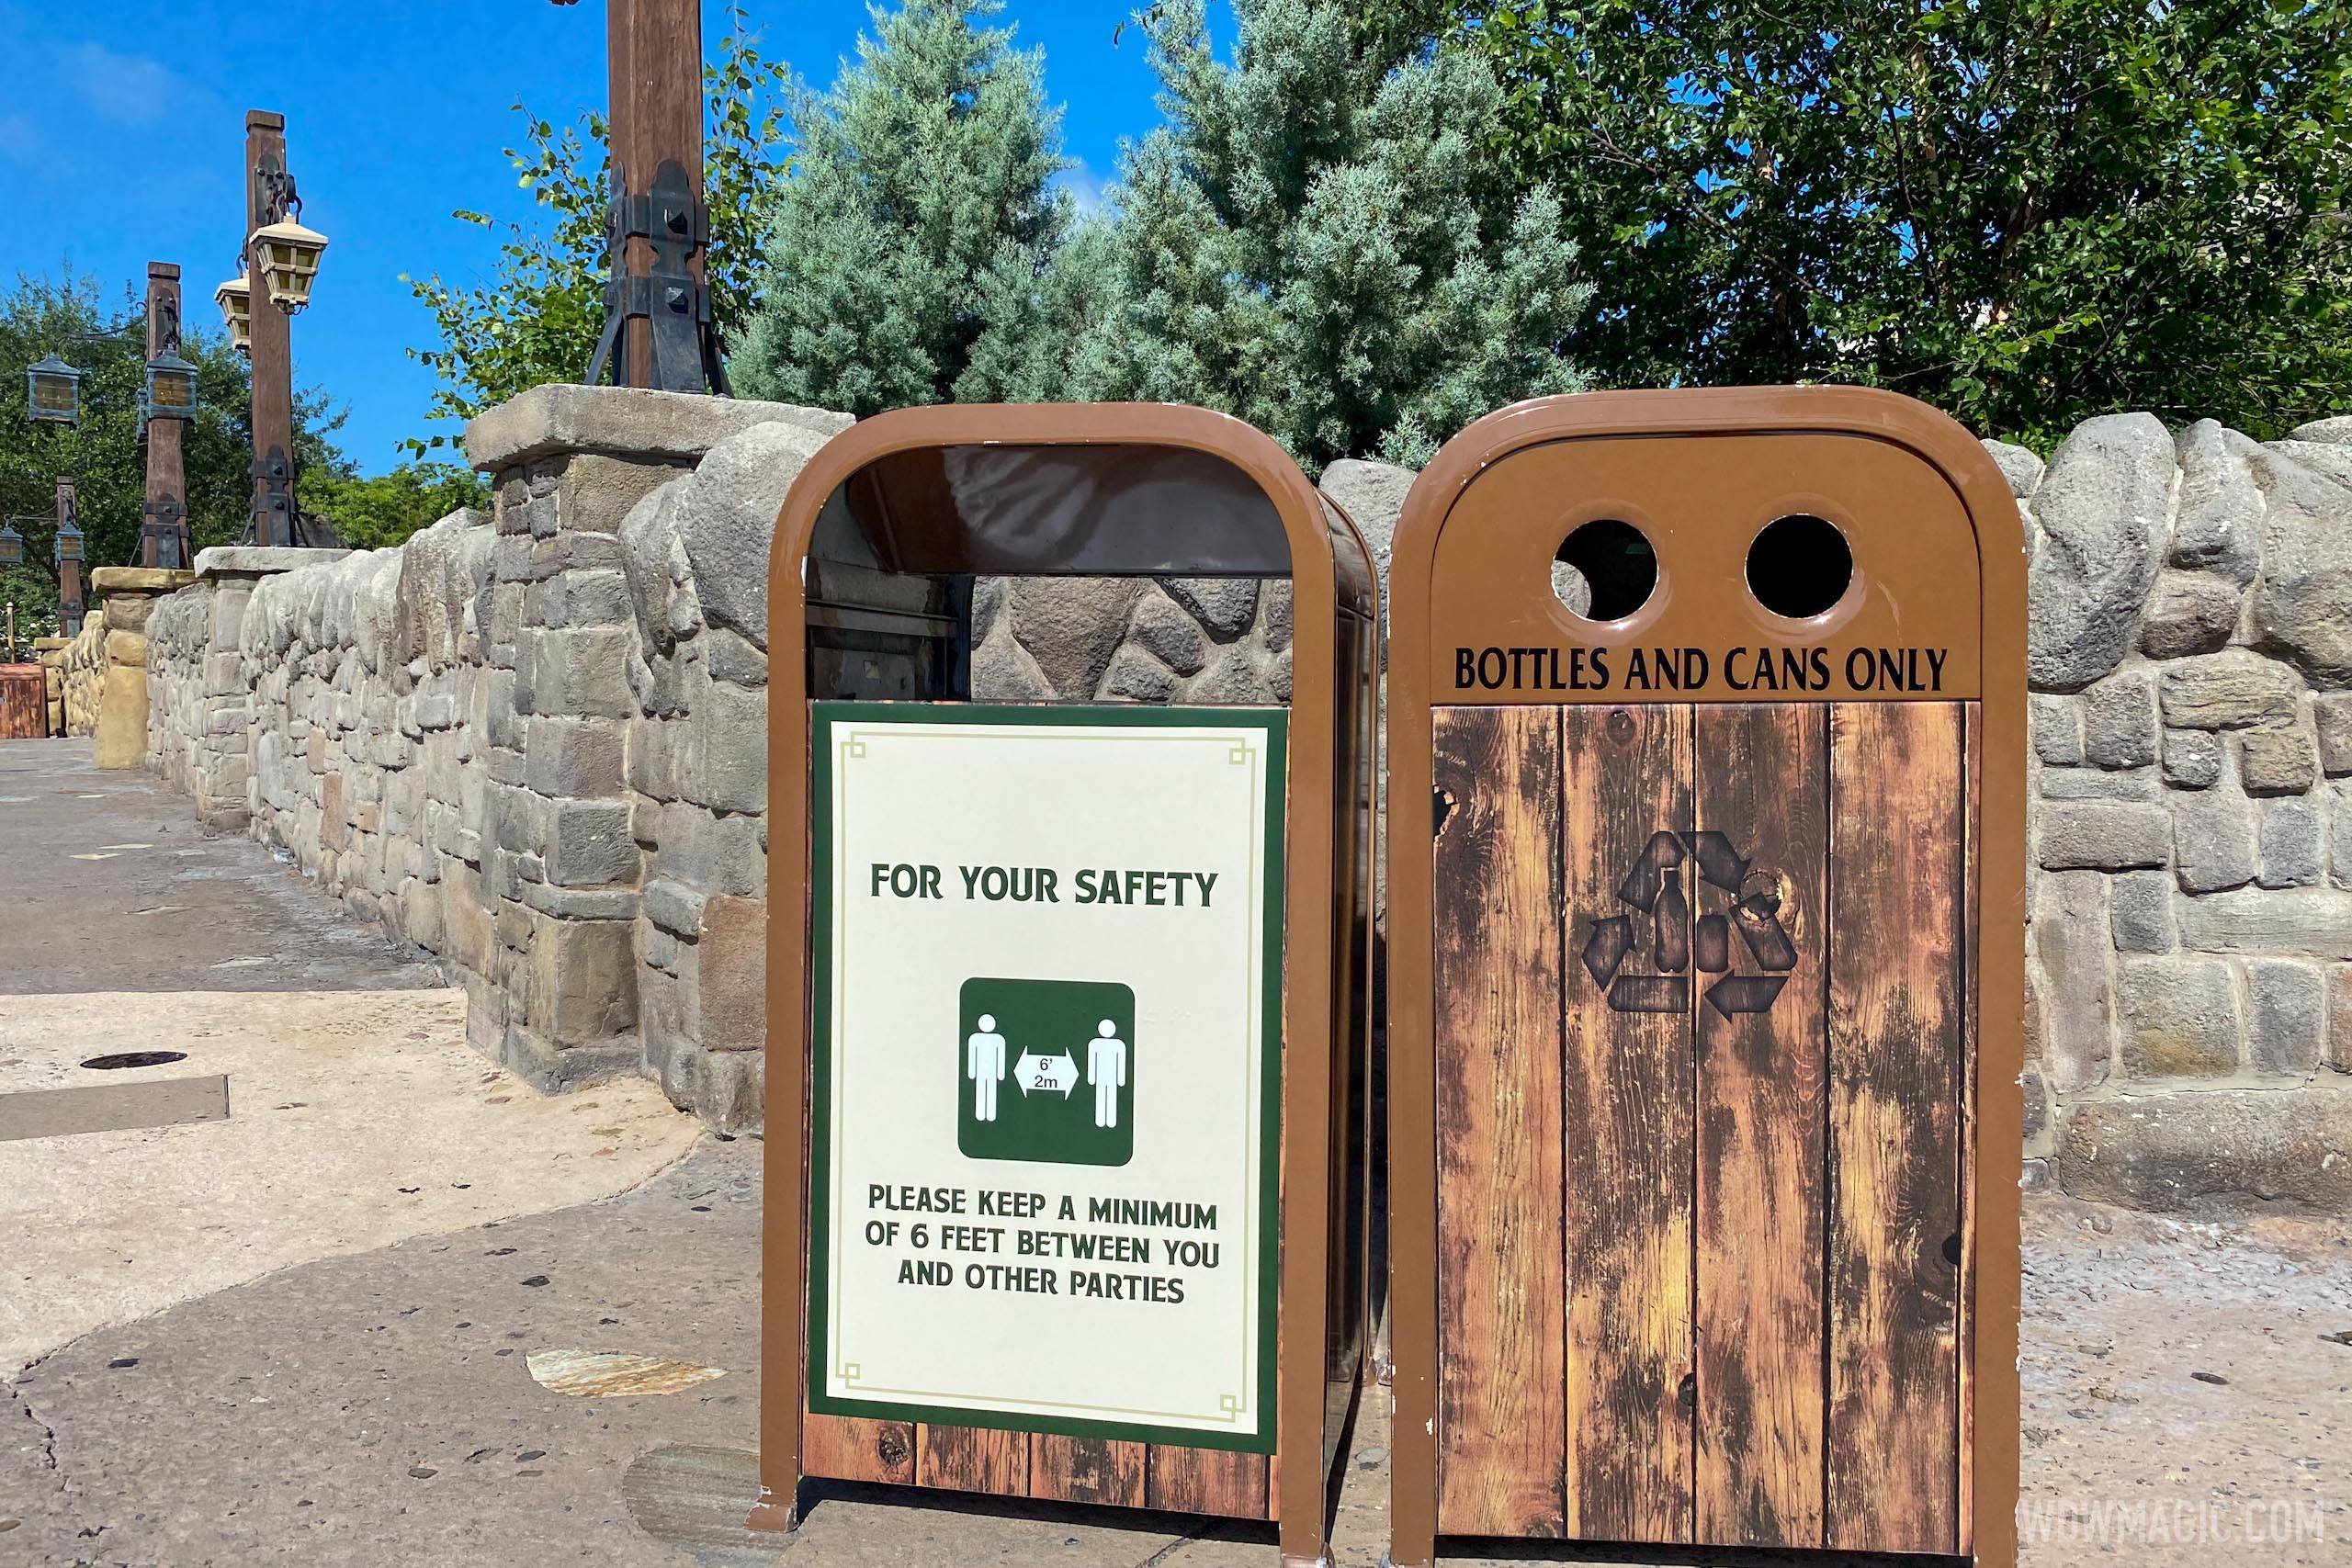 Signs throughout the park enforcing social distancing